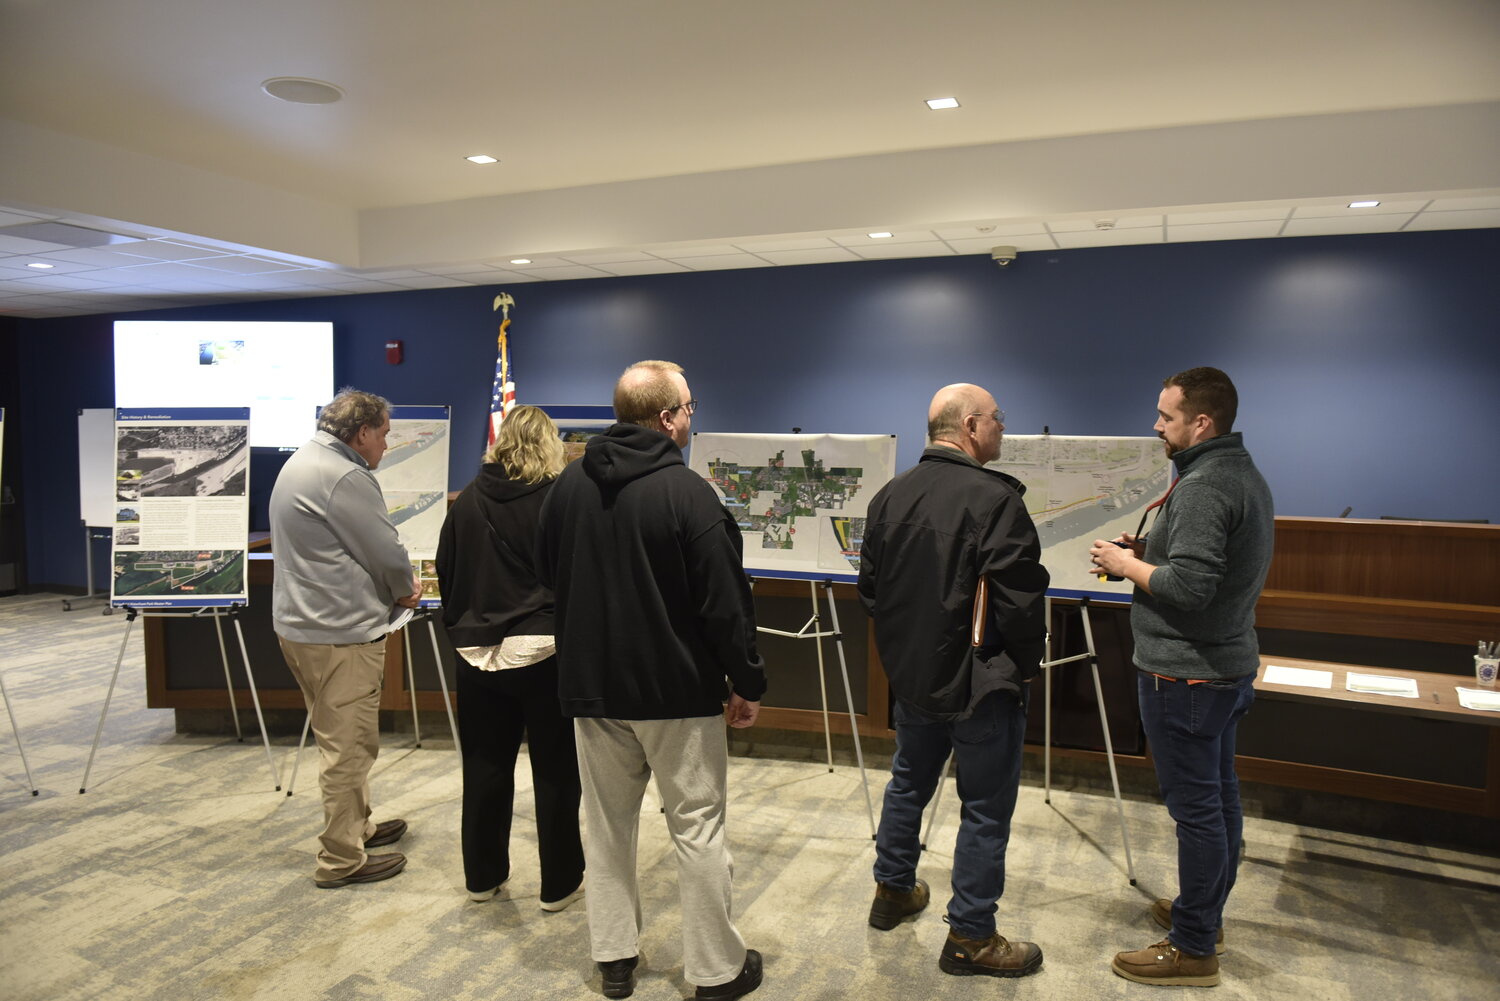 Parks Manager Corey Crownhart spoke with Ridgefield residents about the city waterfront’s history and developments at an open house, Jan. 30.